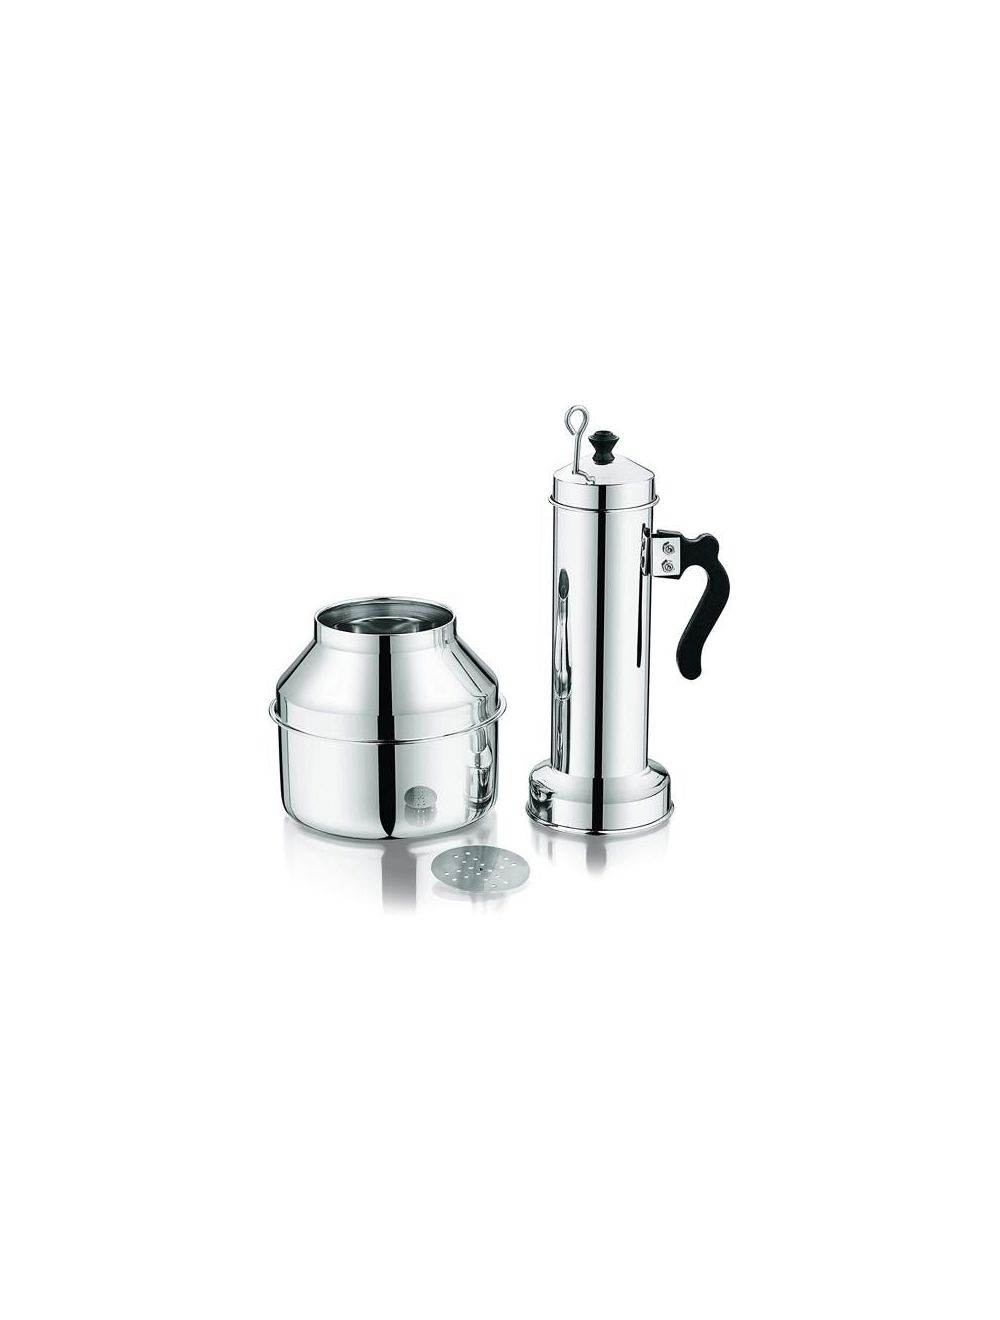 Royalford RF9708 Stainless Steel Puttu Maker With Pot